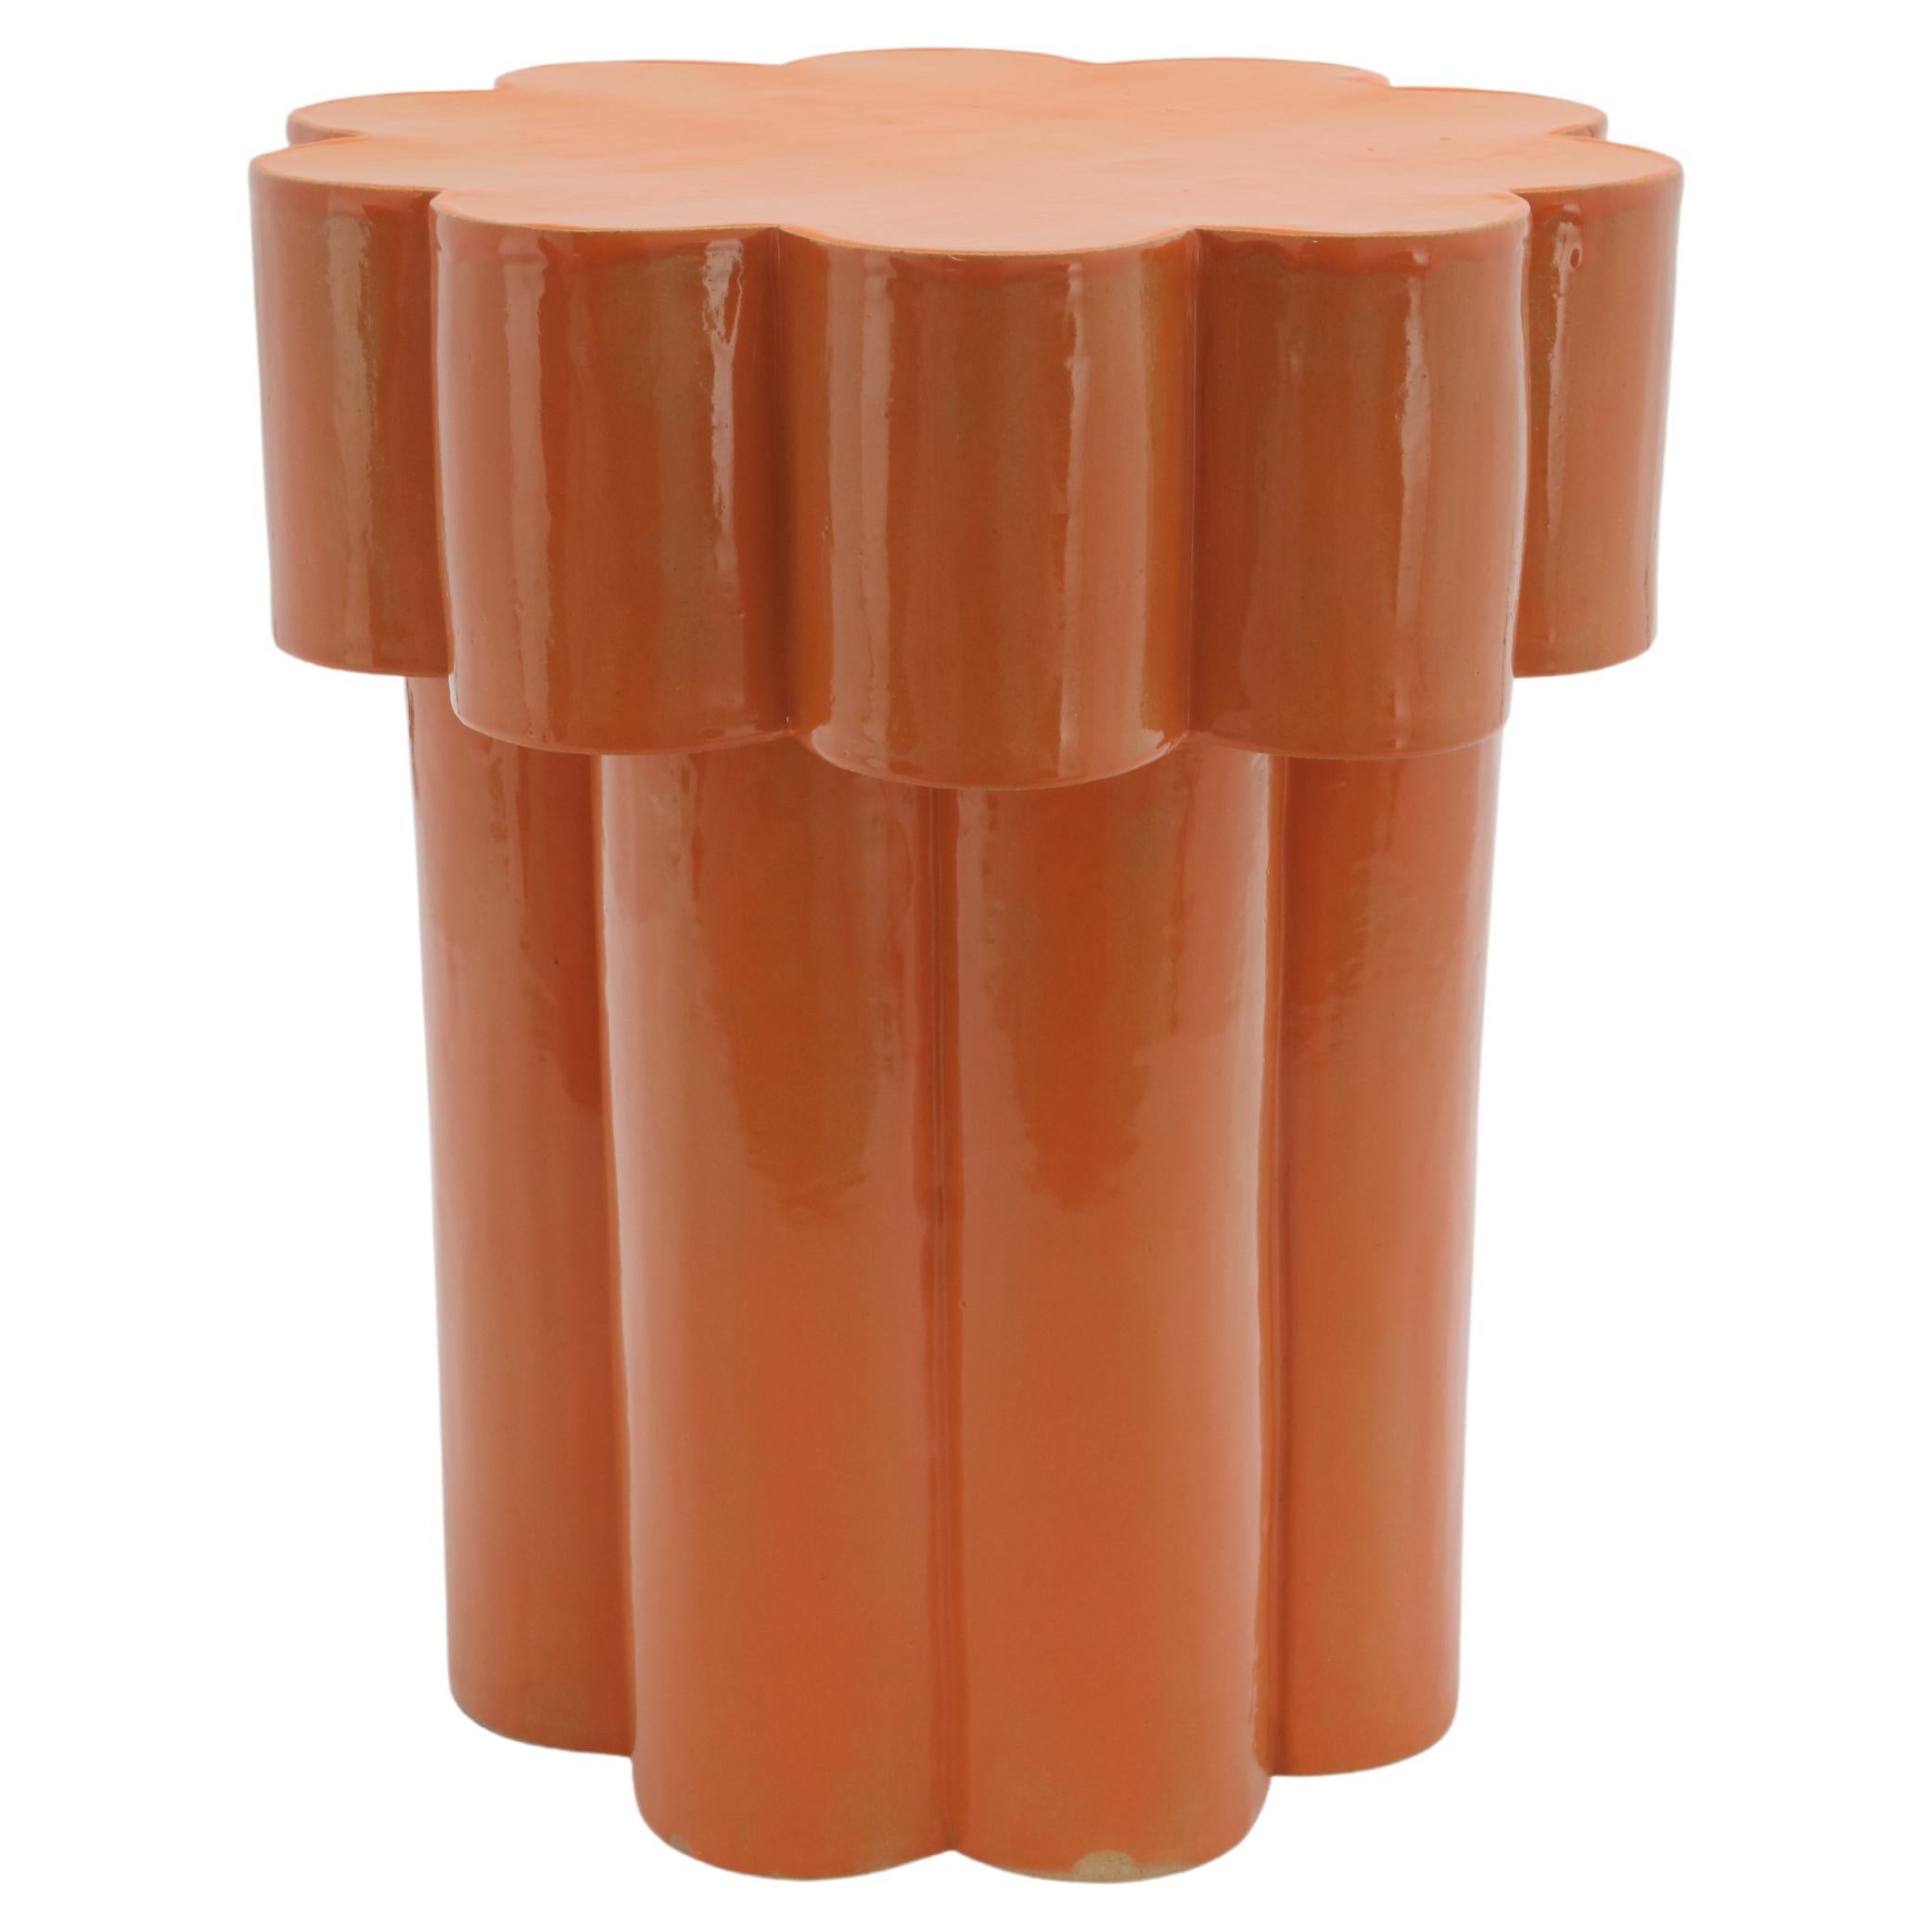 Two-Tier Ceramic Cloud Side Table & Stool in Gloss Orange by BZIPPY For Sale